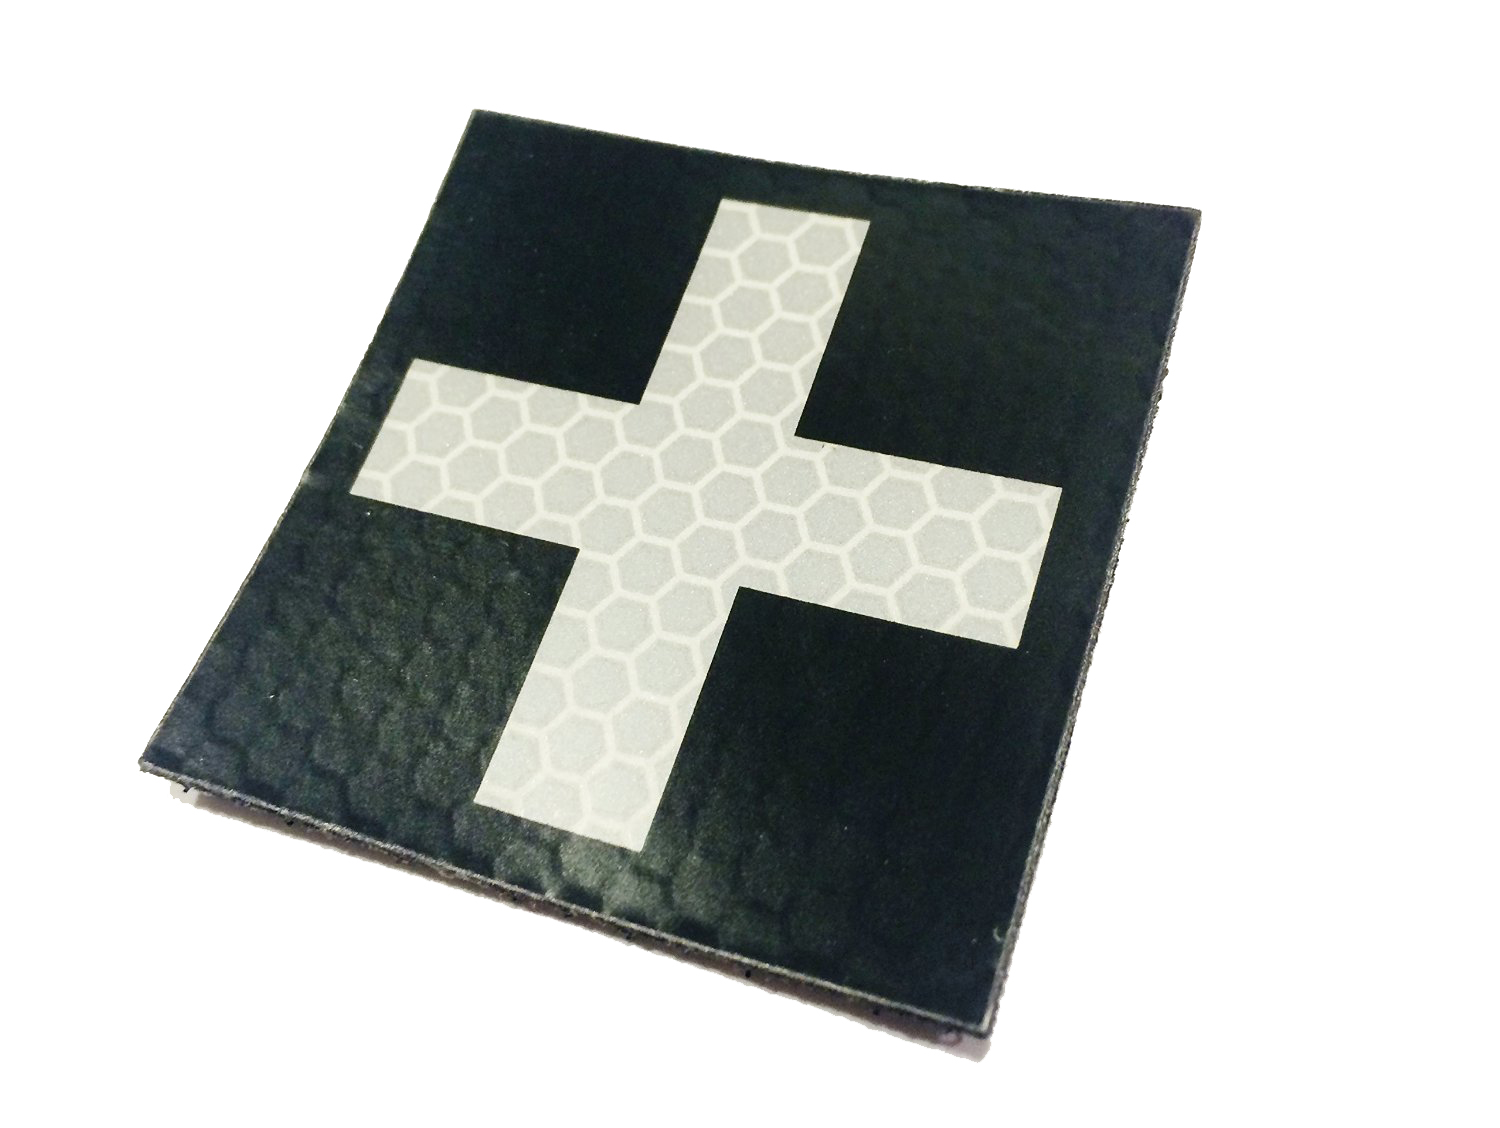 White Combat Medic Reflective Cross Patch — Empire Tactical USA